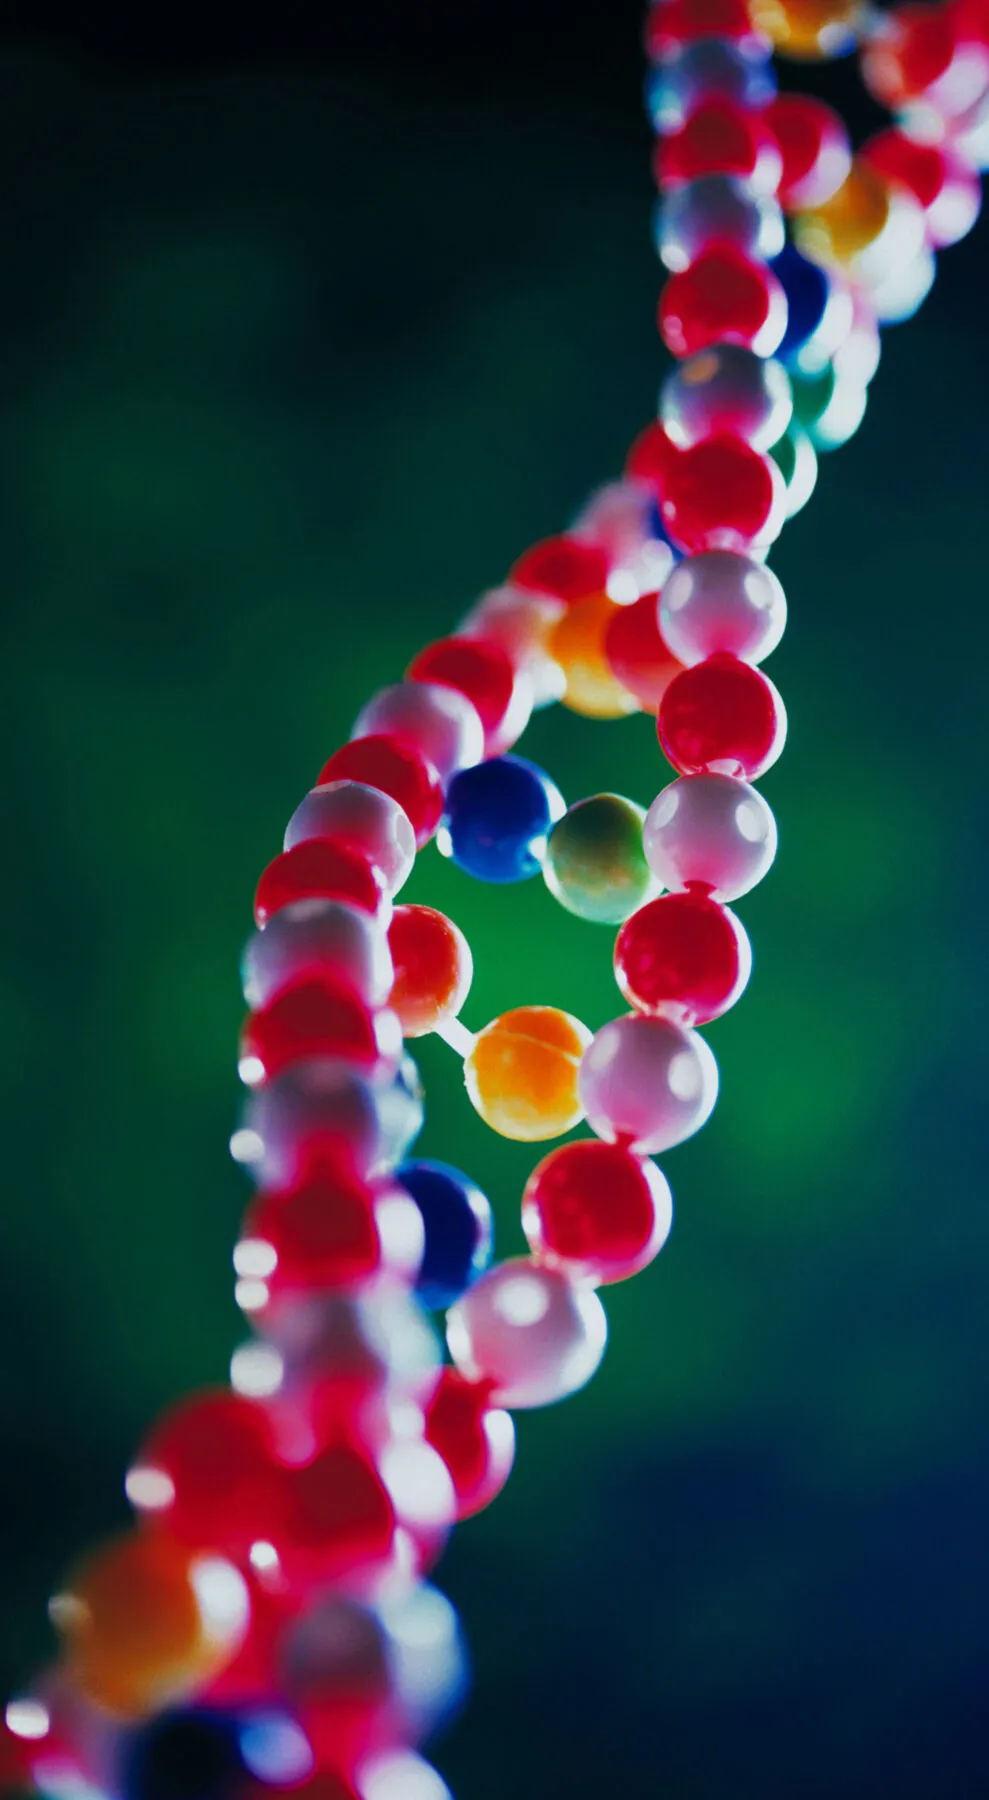 A model representing the structure of DNA